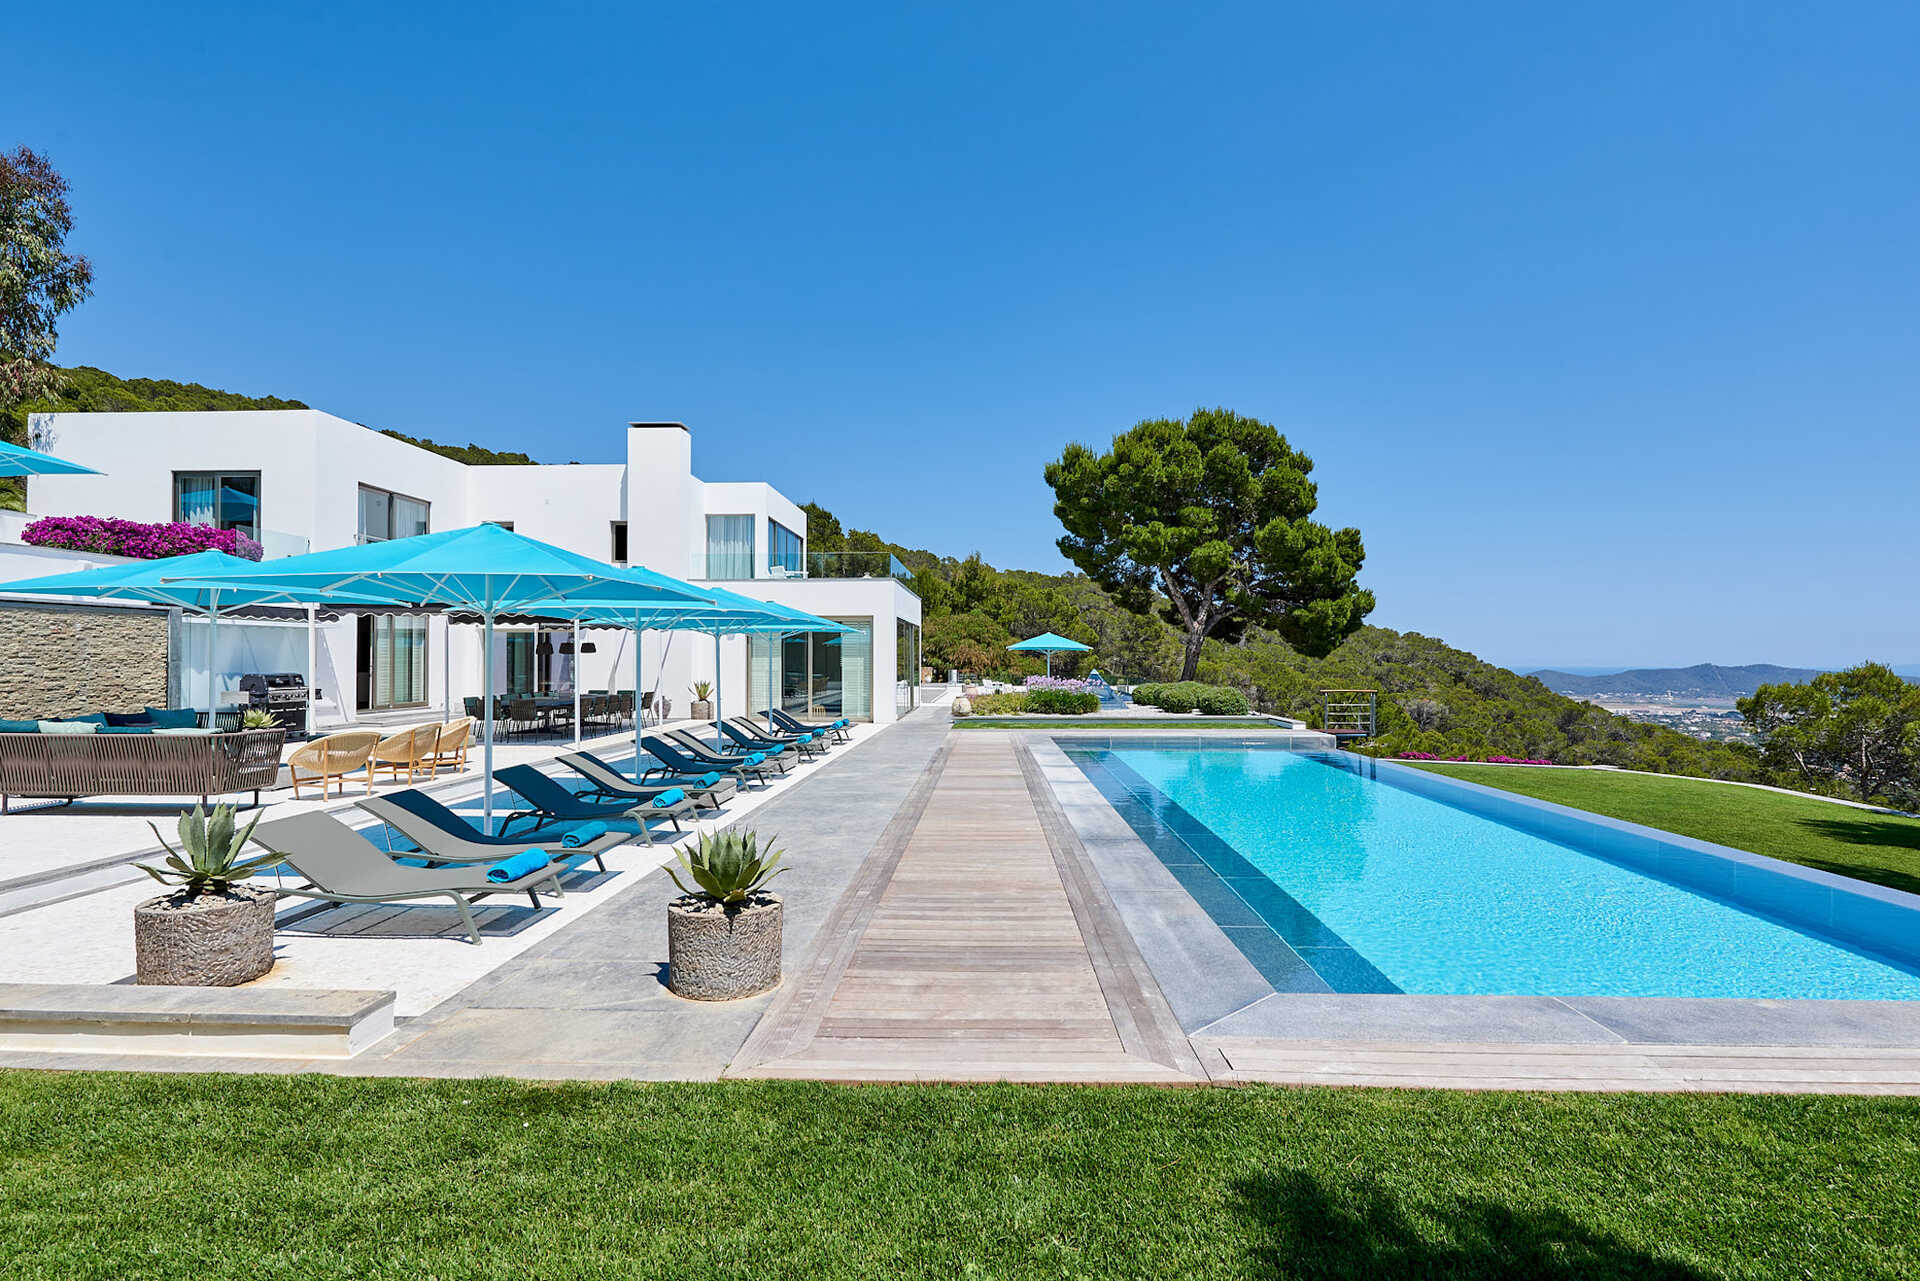 Property Image 1 - Rent this Luxury Villa with Private Pool, Ibiza Villa 1299